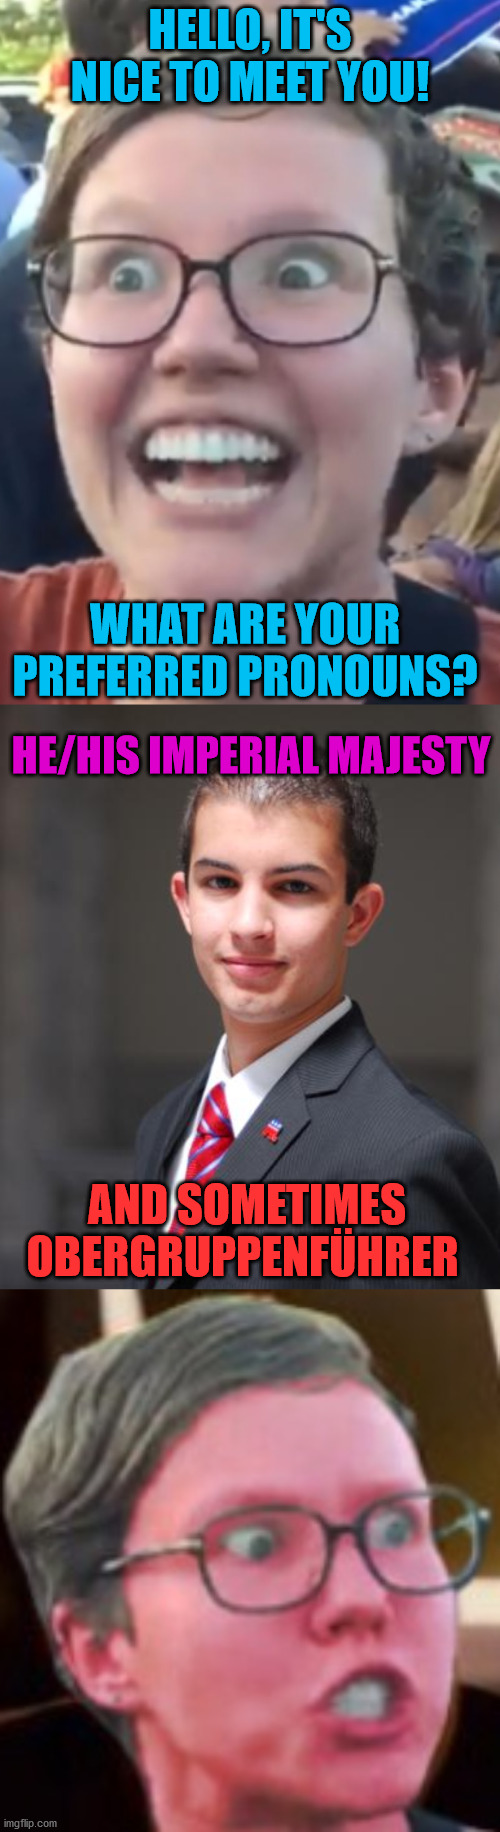 HELLO, IT'S NICE TO MEET YOU! WHAT ARE YOUR PREFERRED PRONOUNS? HE/HIS IMPERIAL MAJESTY; AND SOMETIMES OBERGRUPPENFÜHRER | image tagged in college conservative,feminist,angry feminist,memes,nazi,leftist | made w/ Imgflip meme maker